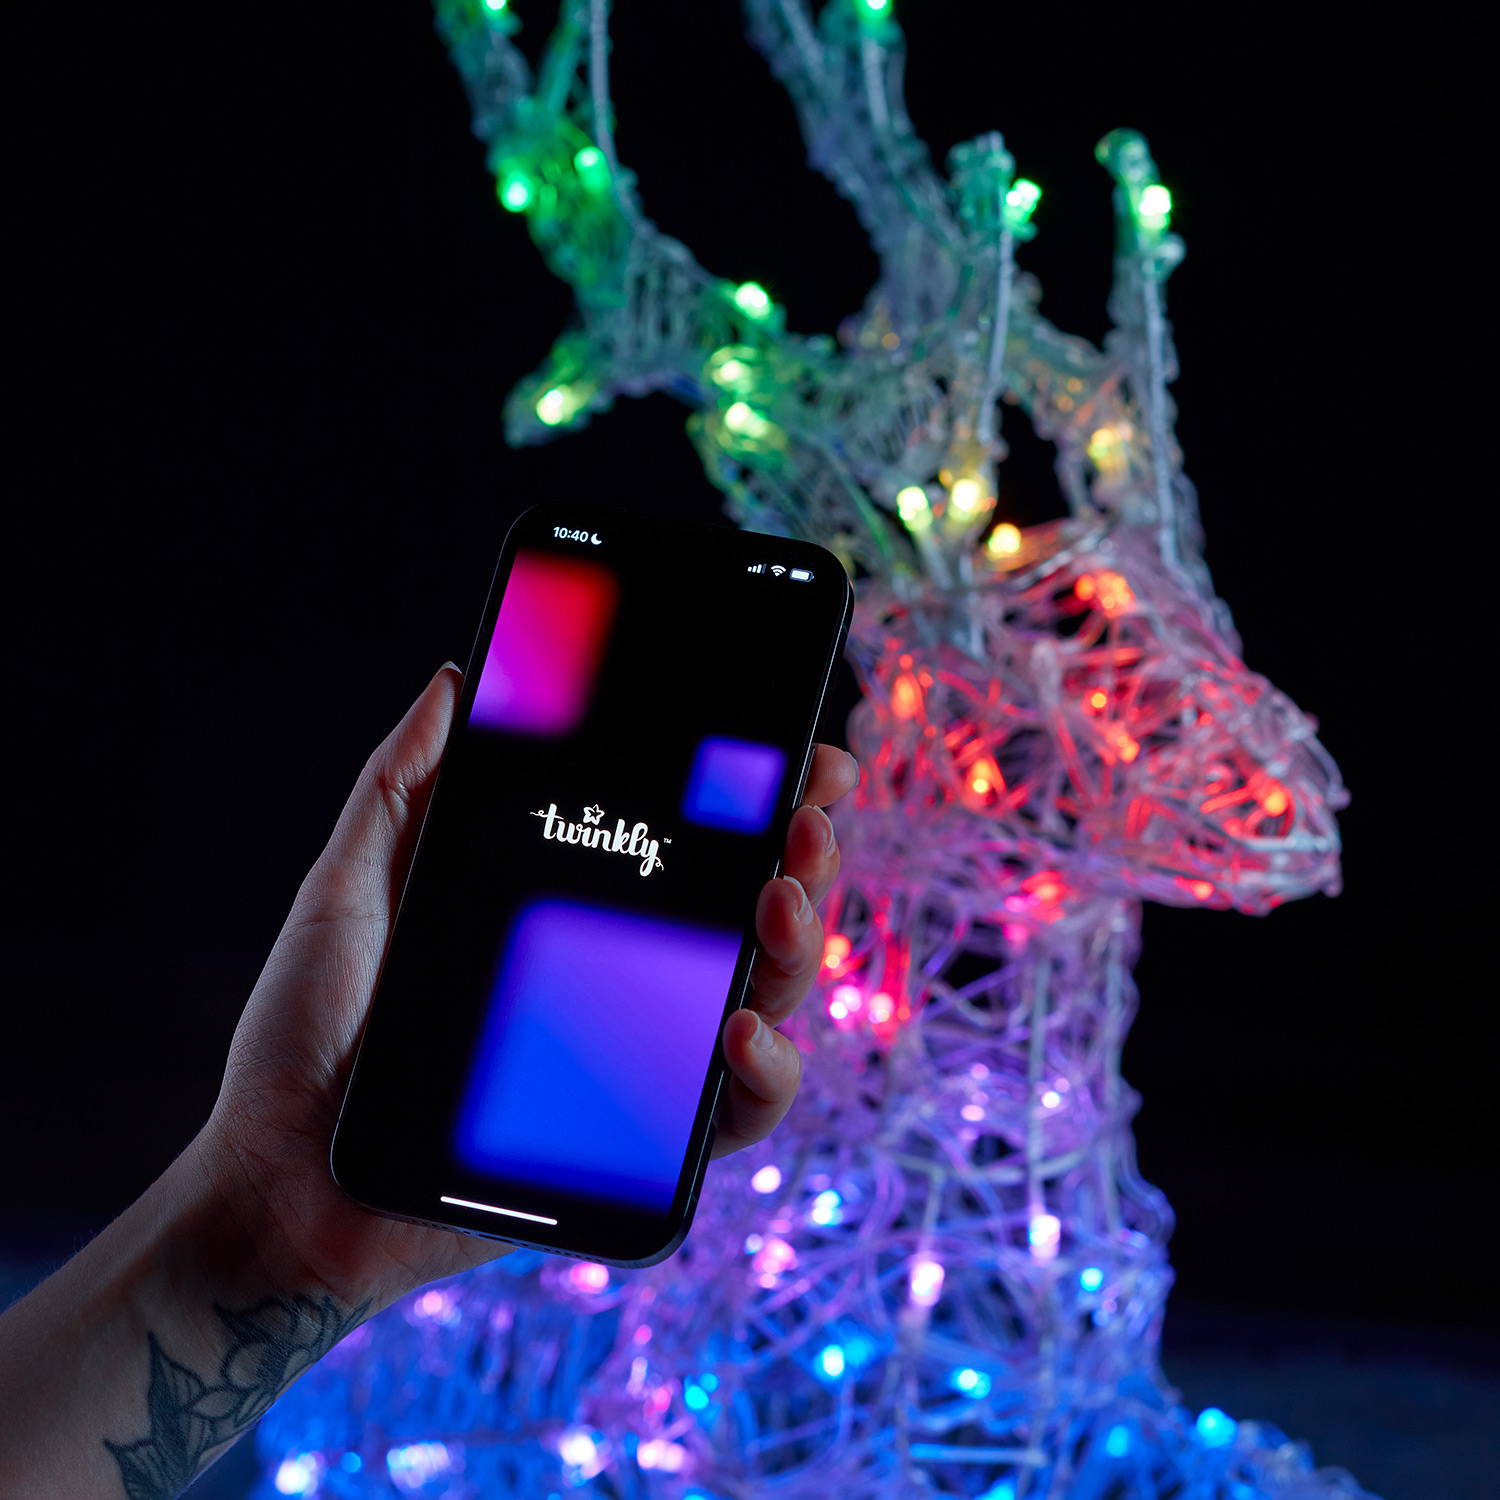 A person holding the Twinkly smart app in front of their reindeer.